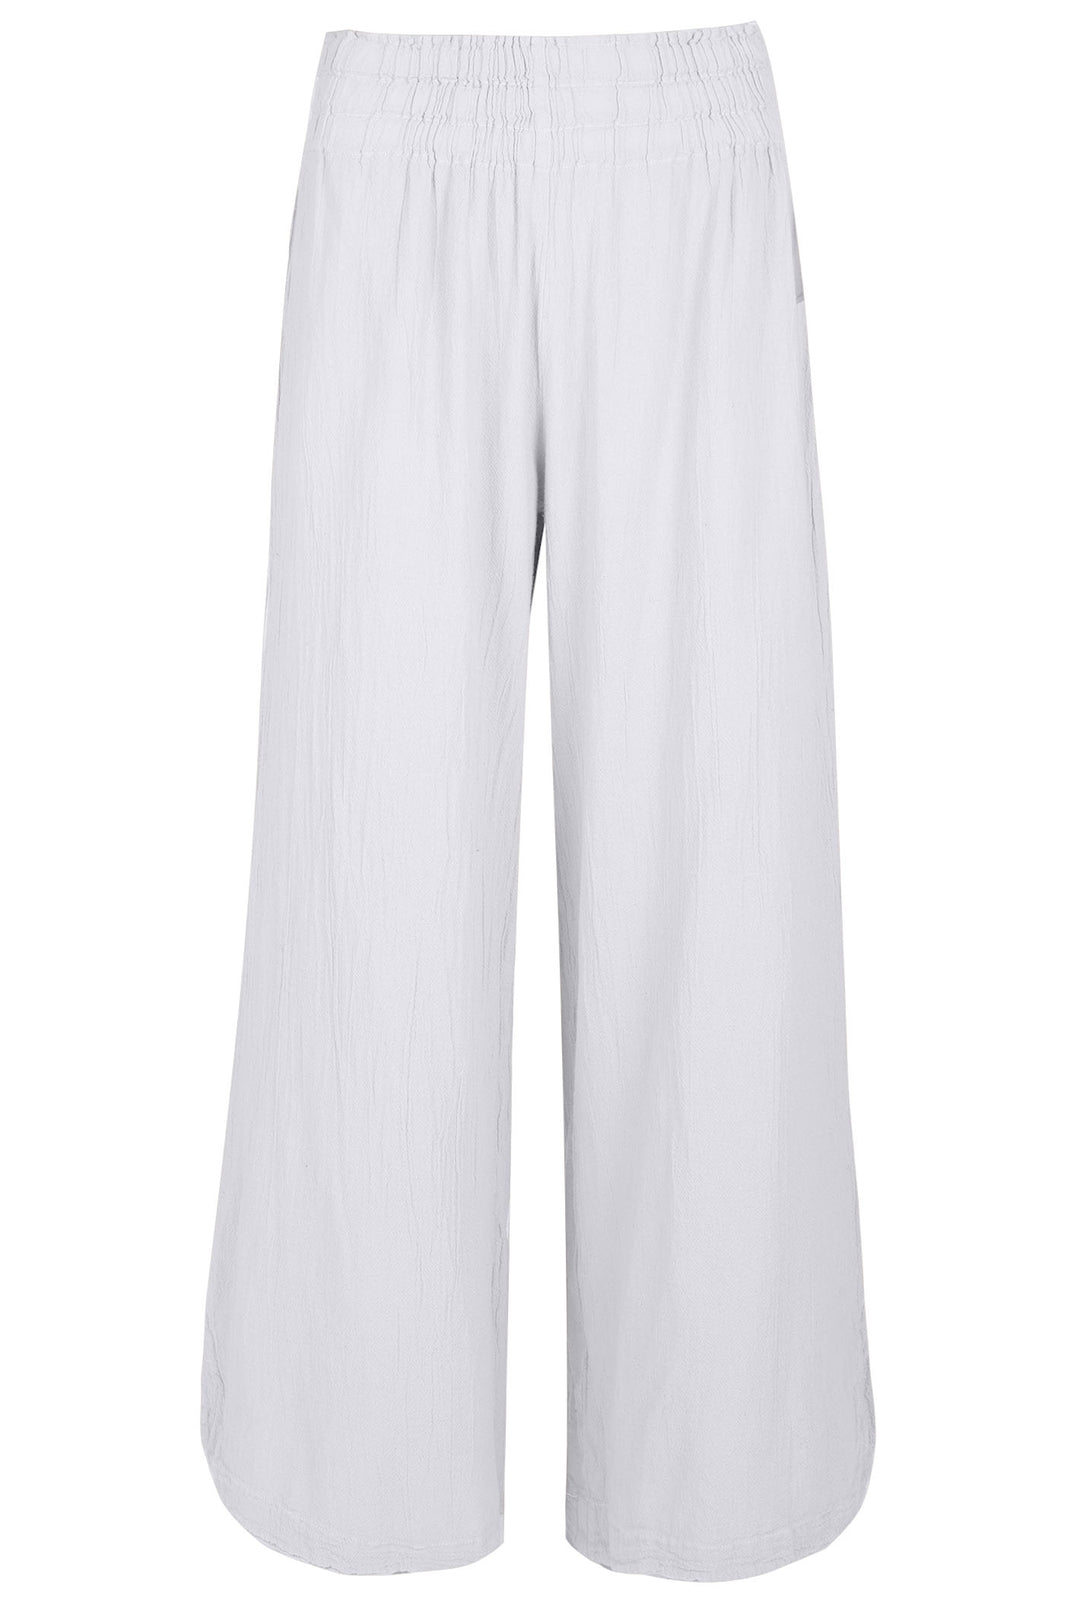 Onelife P609 Opalo Snow White Wide Leg Flared Cotton Trousers - Experience Boutique